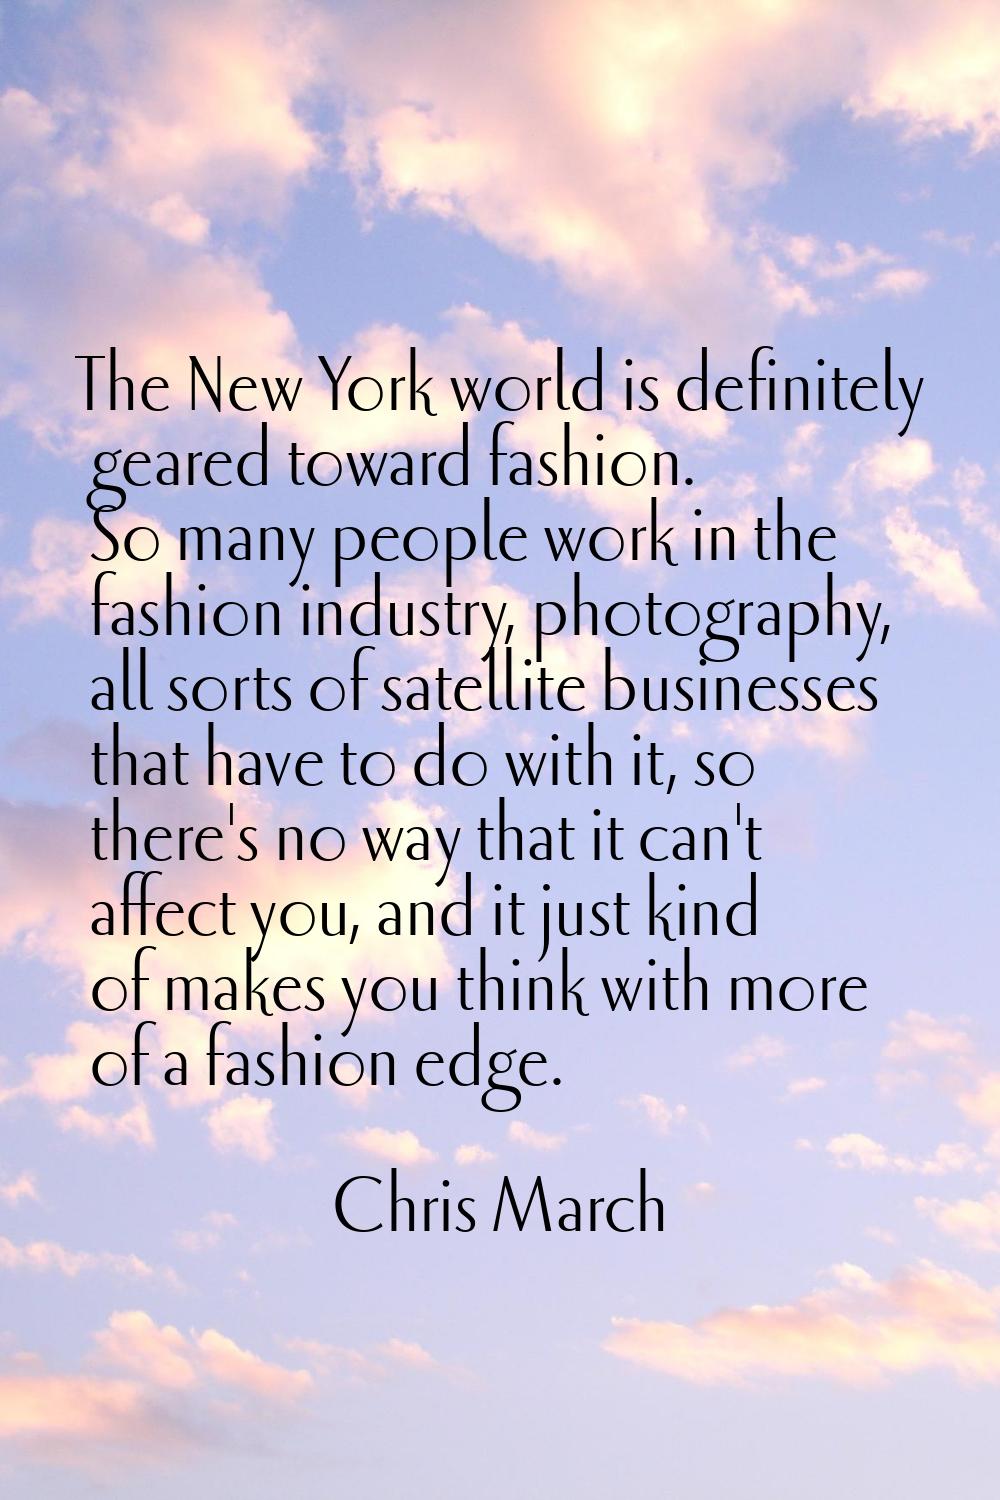 The New York world is definitely geared toward fashion. So many people work in the fashion industry